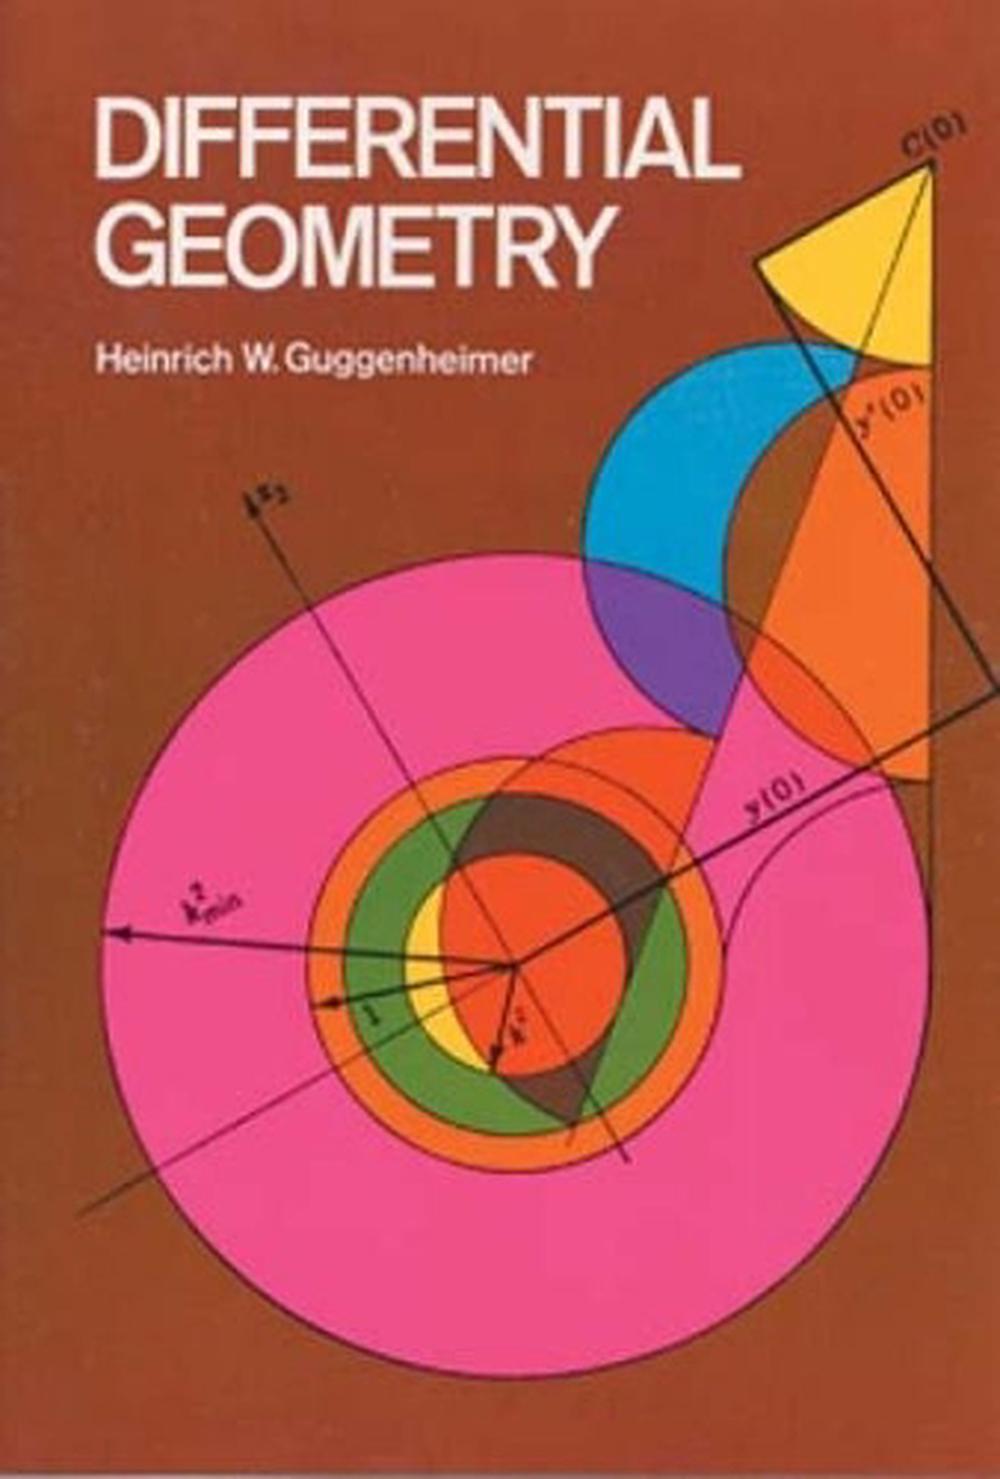 differential geometry textbook pdf